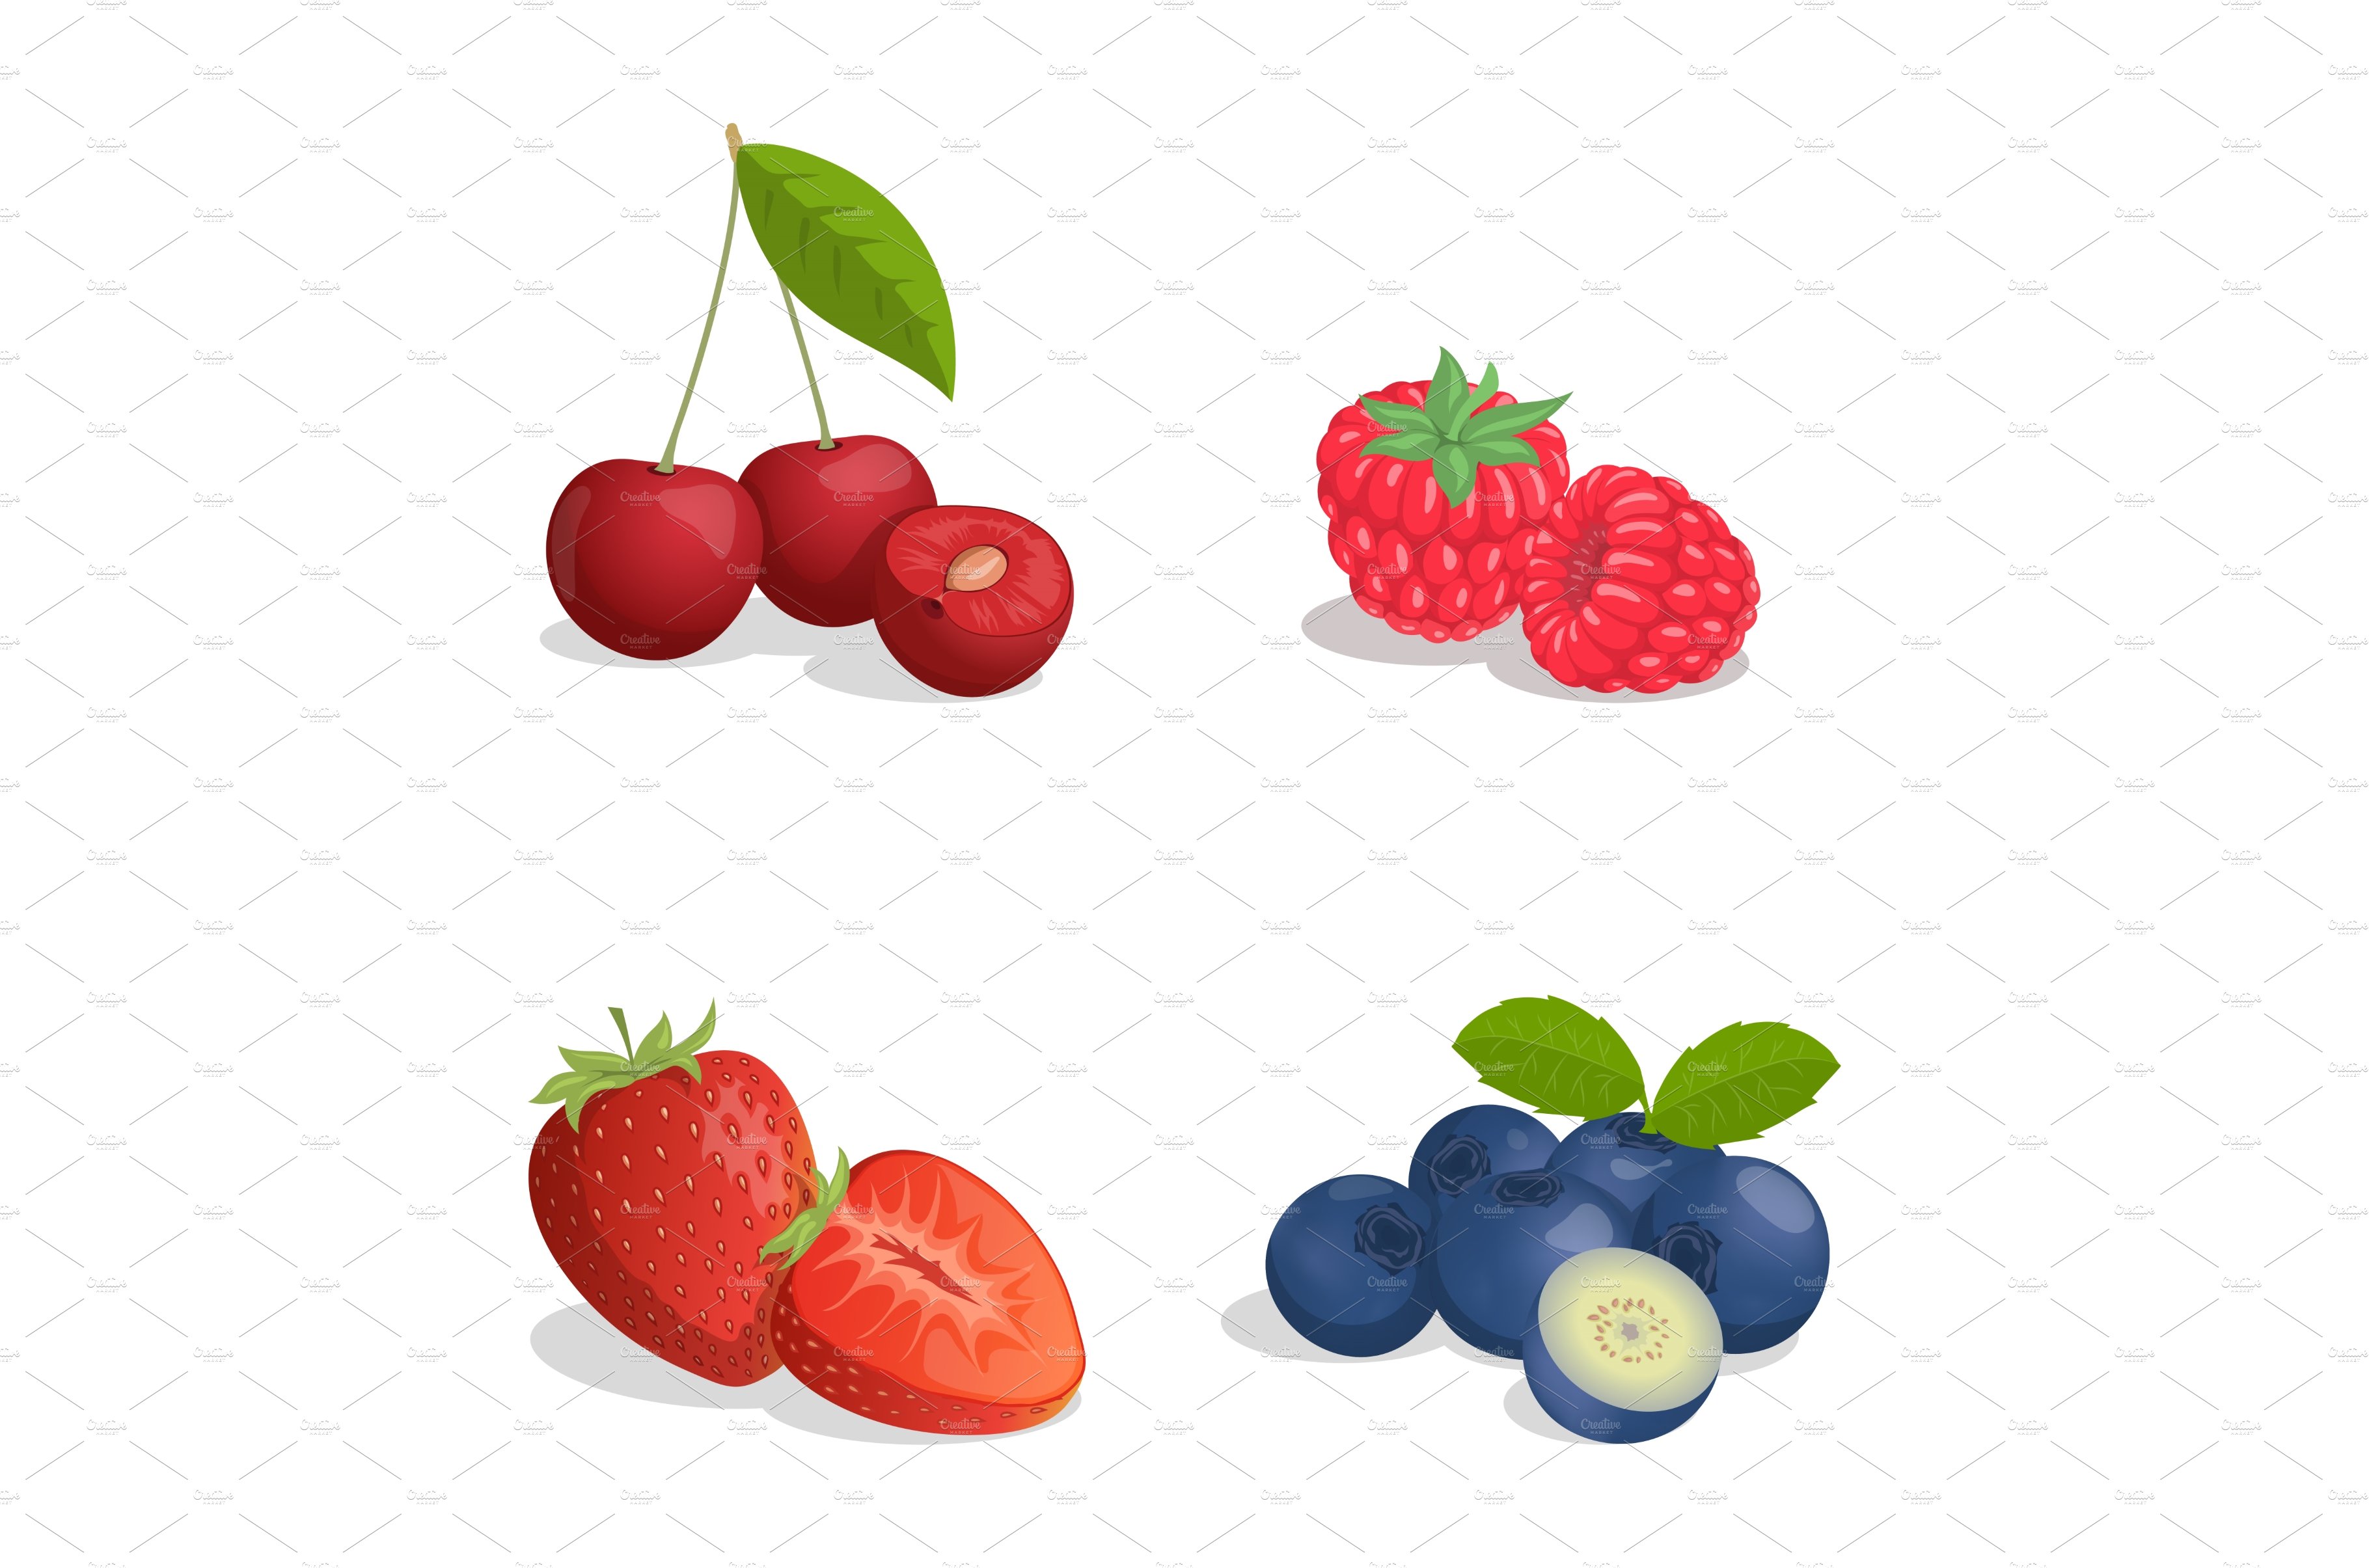 Cherry, raspberry, strawberry, and cover image.